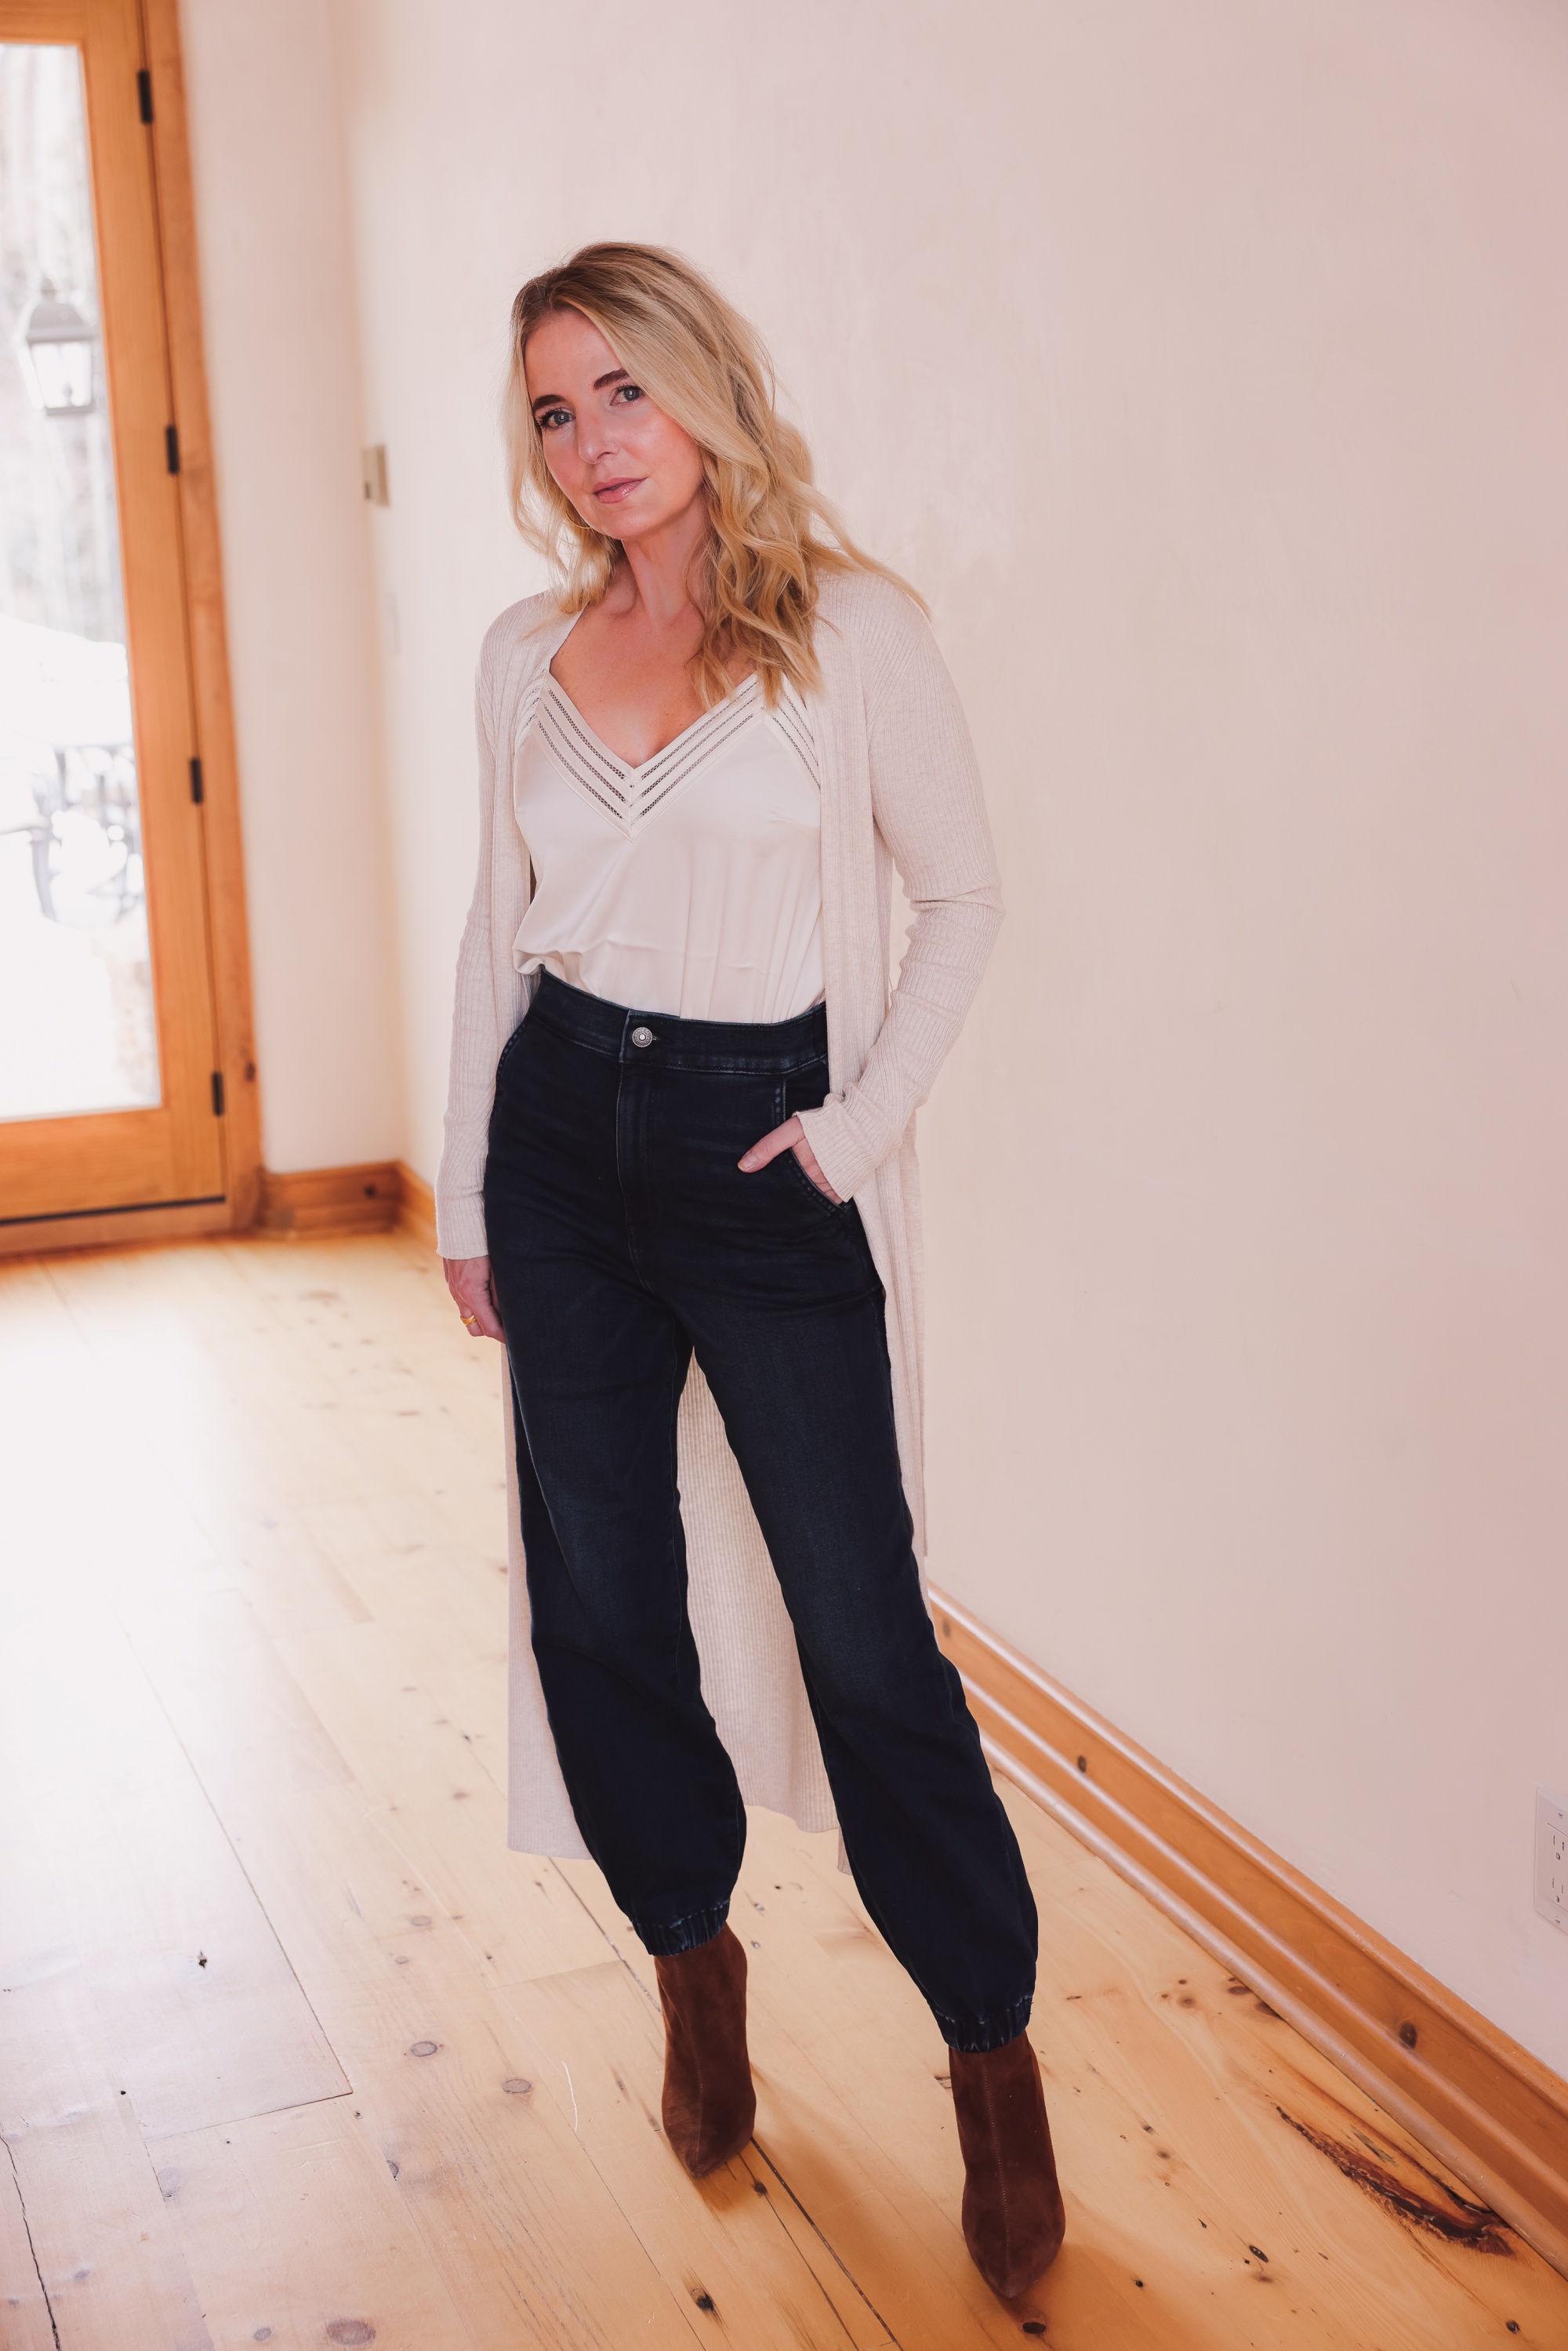 Express Sale, Erin Busbee of Busbee wearing denim joggers, a white satin cami, and long ribbed duster cardigan from Express with Steve Madden brown booties in Telluride, Colorado